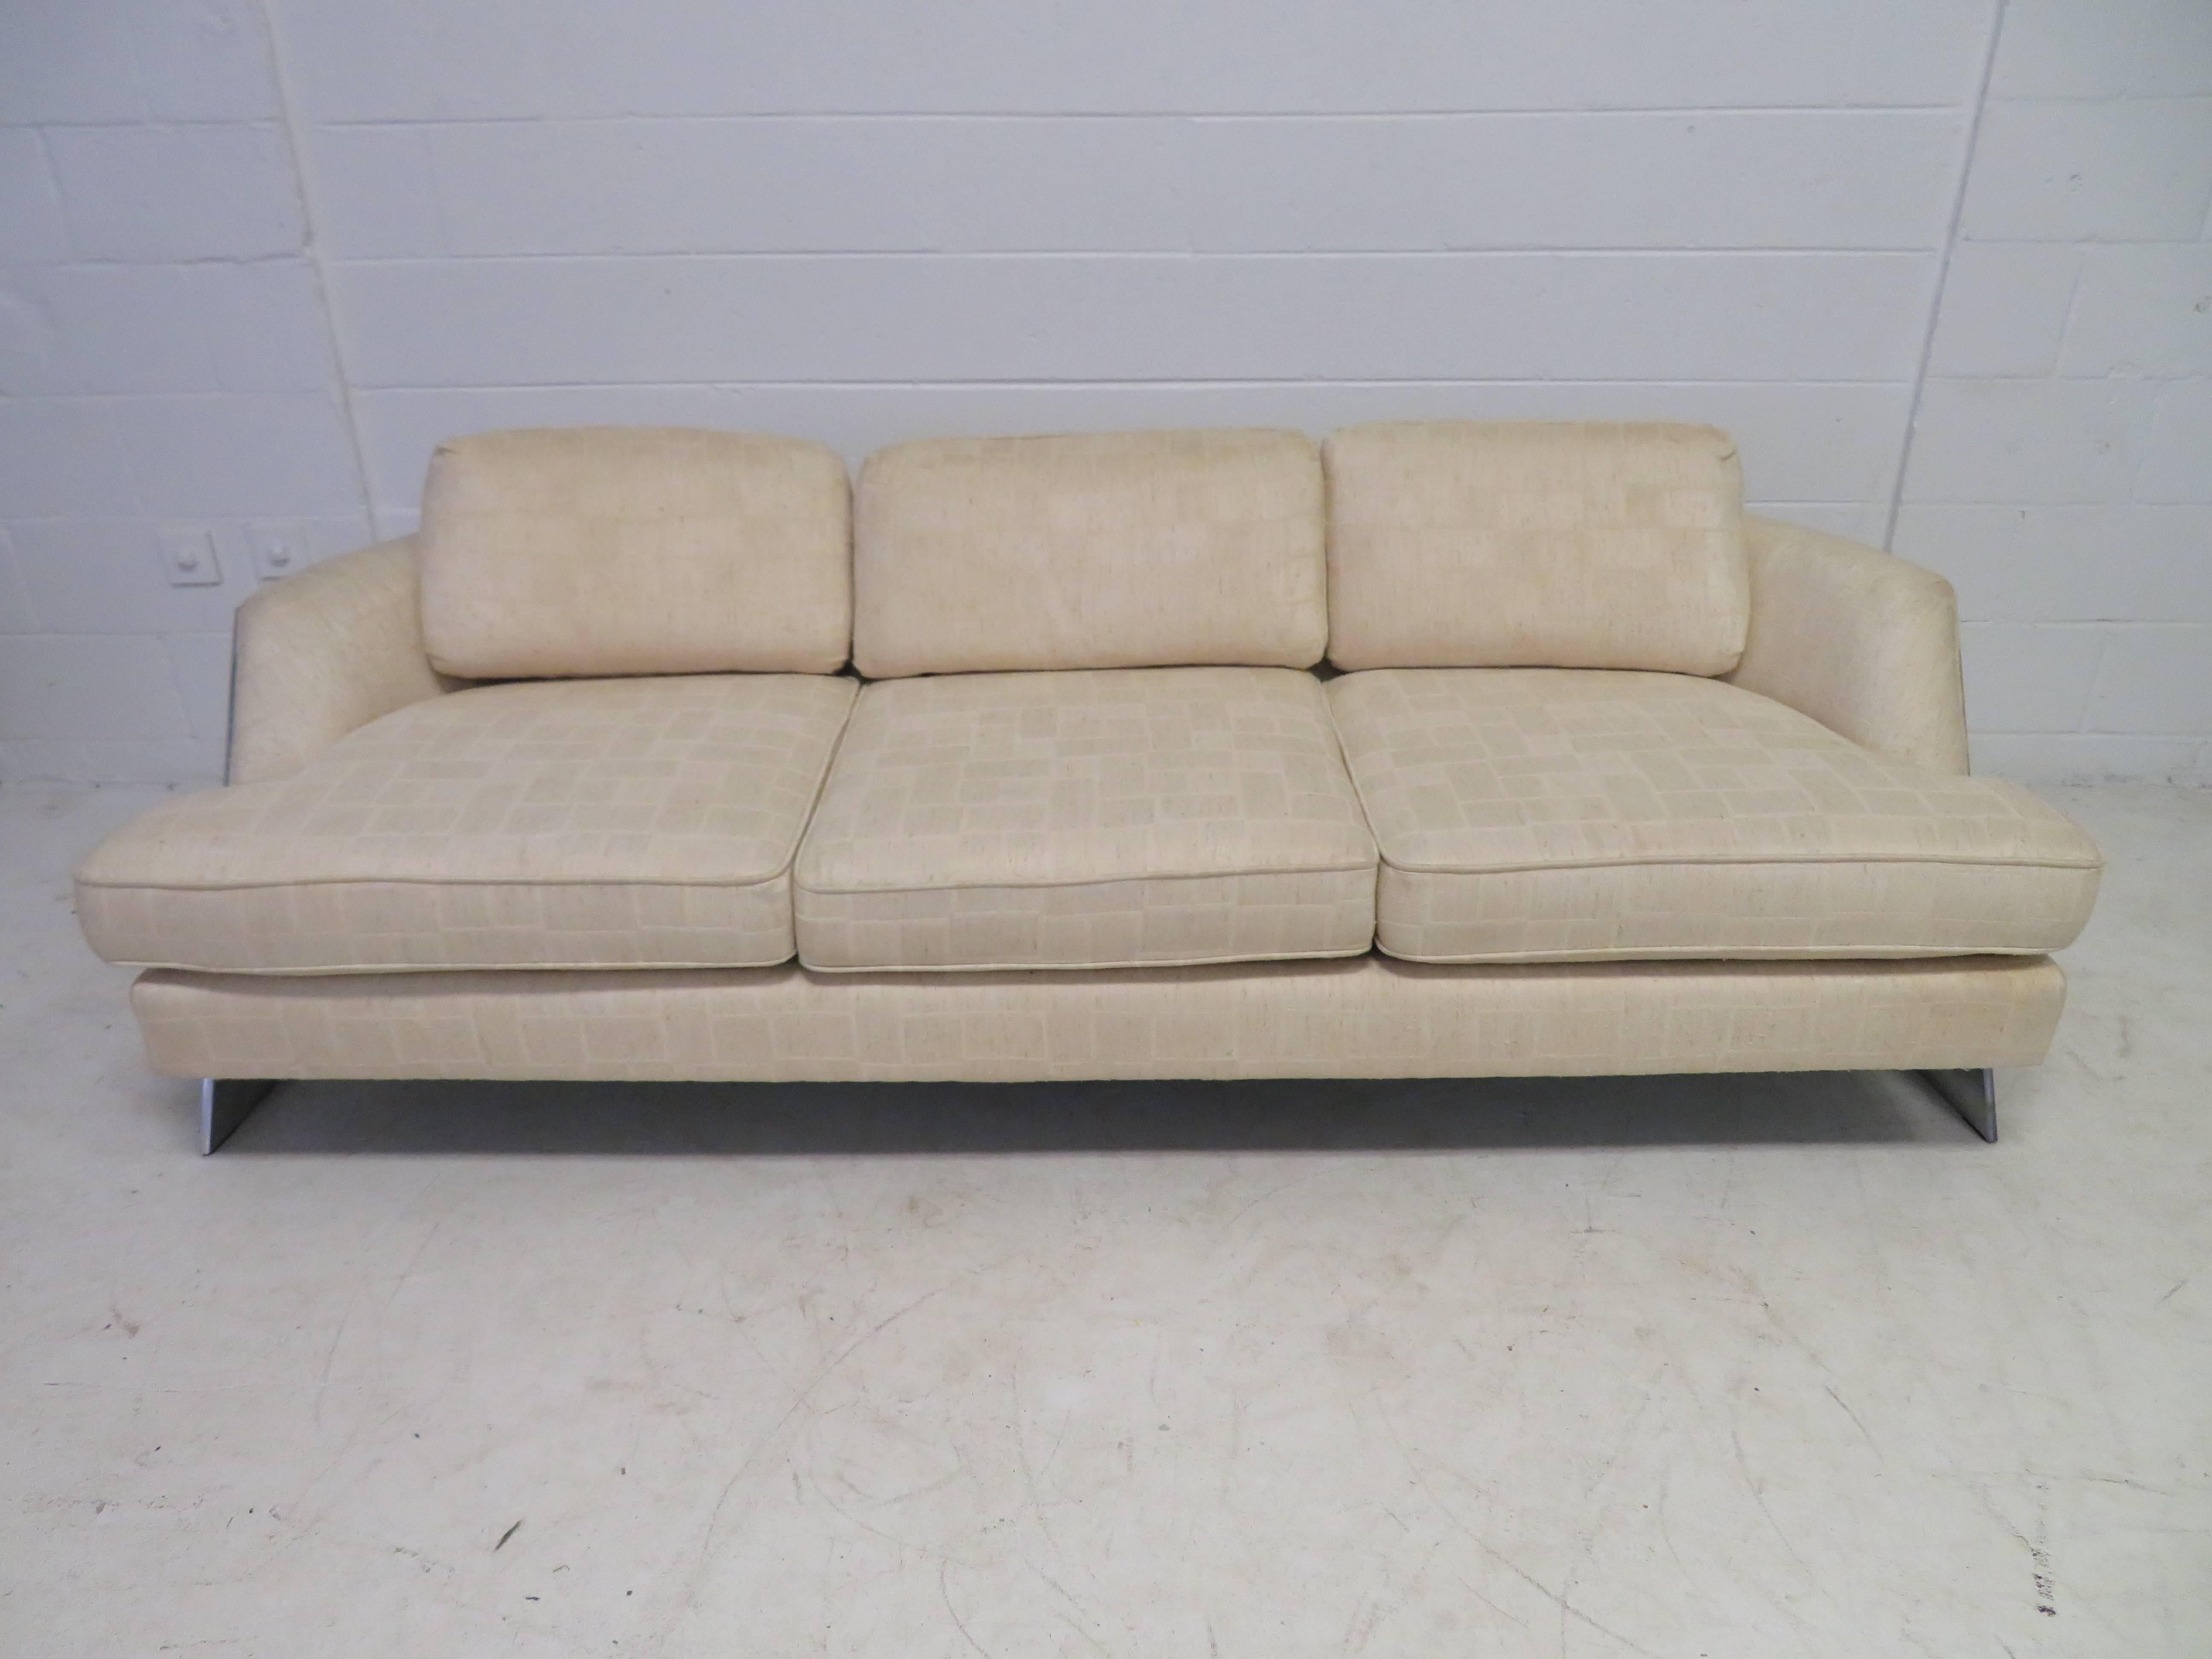 Excellent Milo Baughman curved chromed leg sofa. Very unusual curved chrome legs on either side give this sofa tremendous mid-century appeal-very sexy! This sofa retains it's original oatmeal textured fabric in usable condition-re-upholstery is